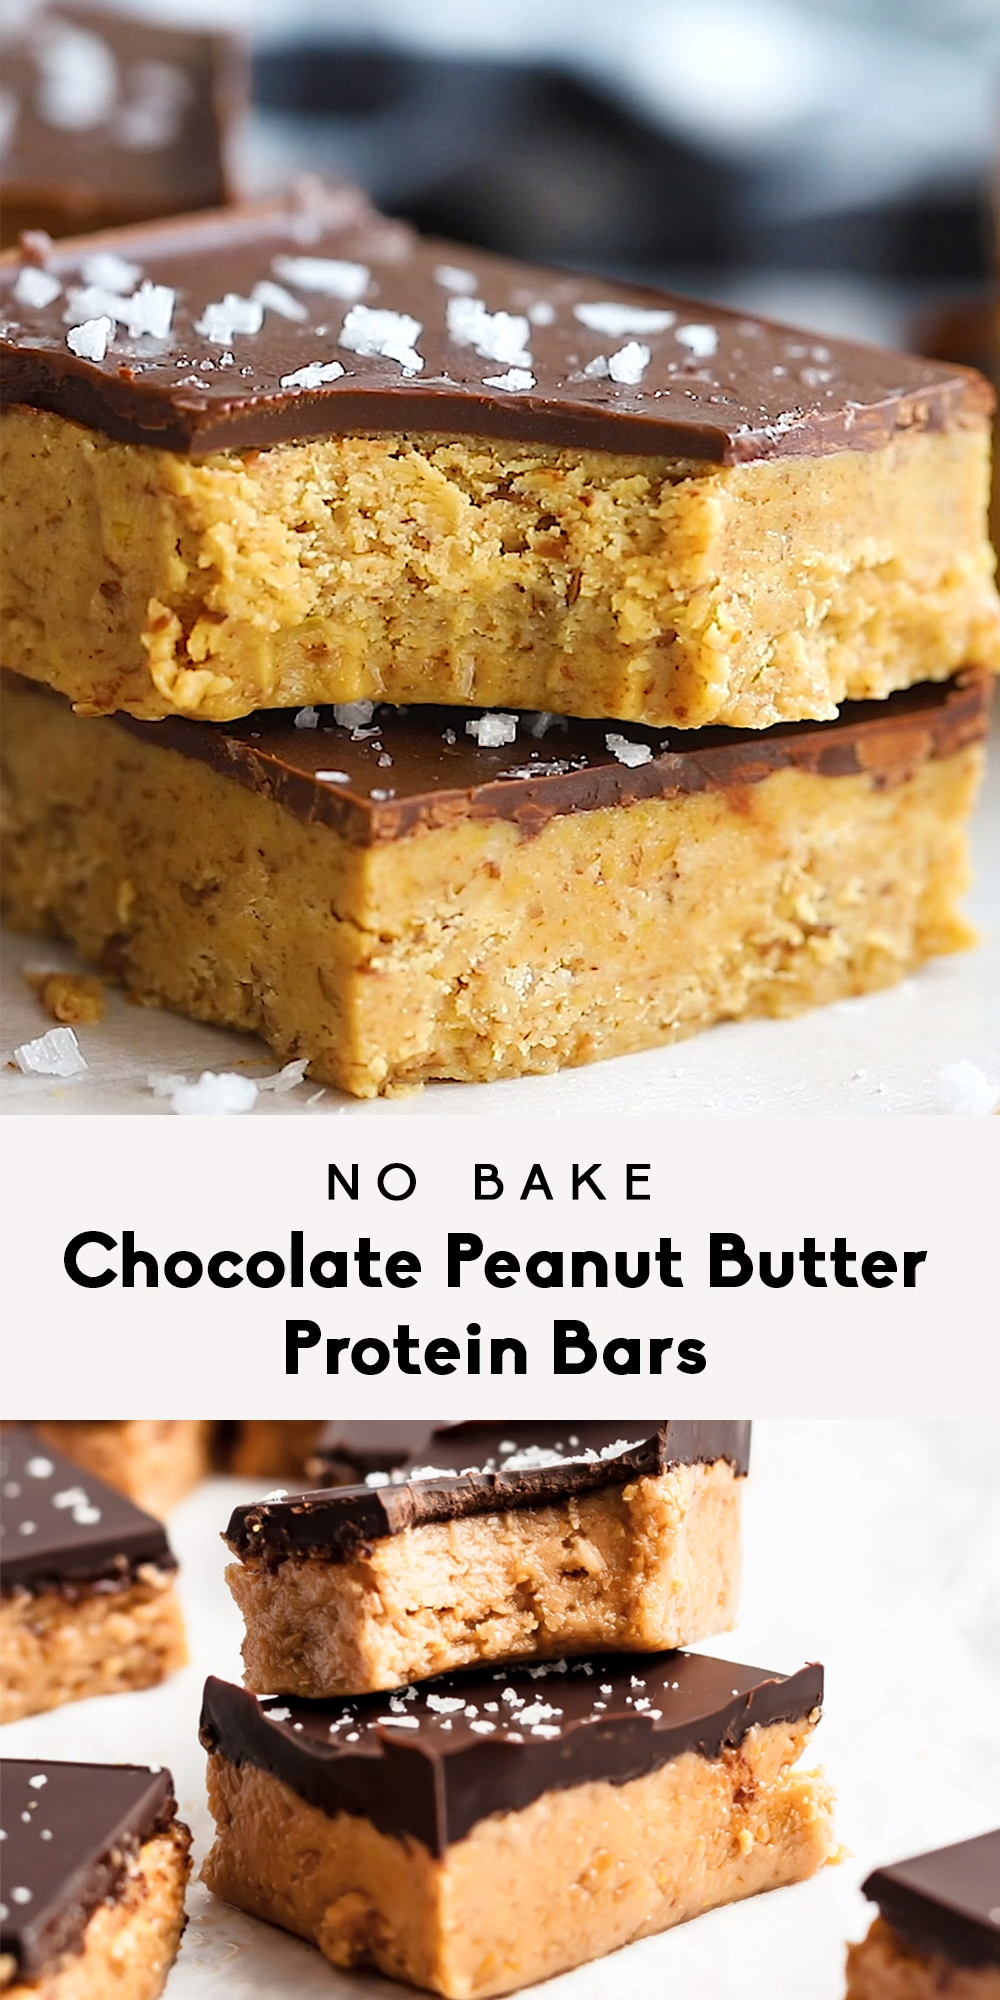 No Bake Chocolate Peanut Butter Protein Bars -   18 diet Snacks coconut oil ideas